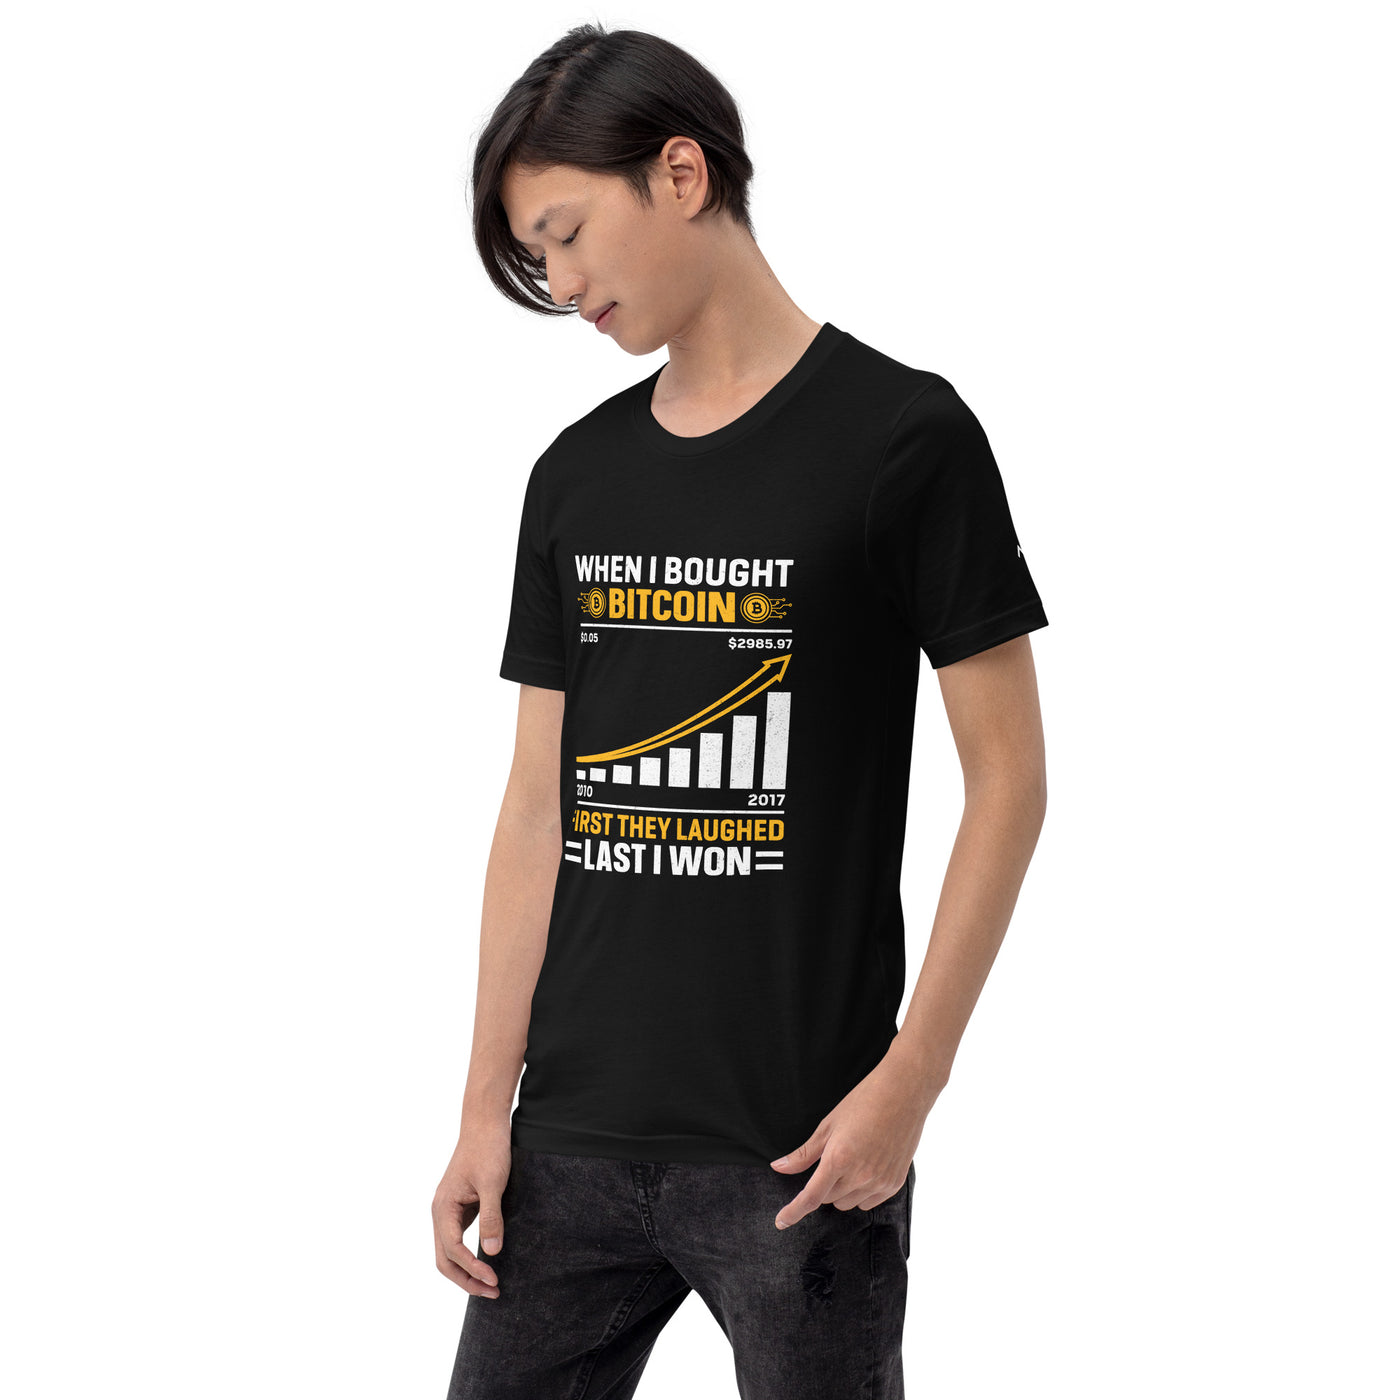 When I Bought Bitcoin, First they laughed, Last I won Unisex t-shirt